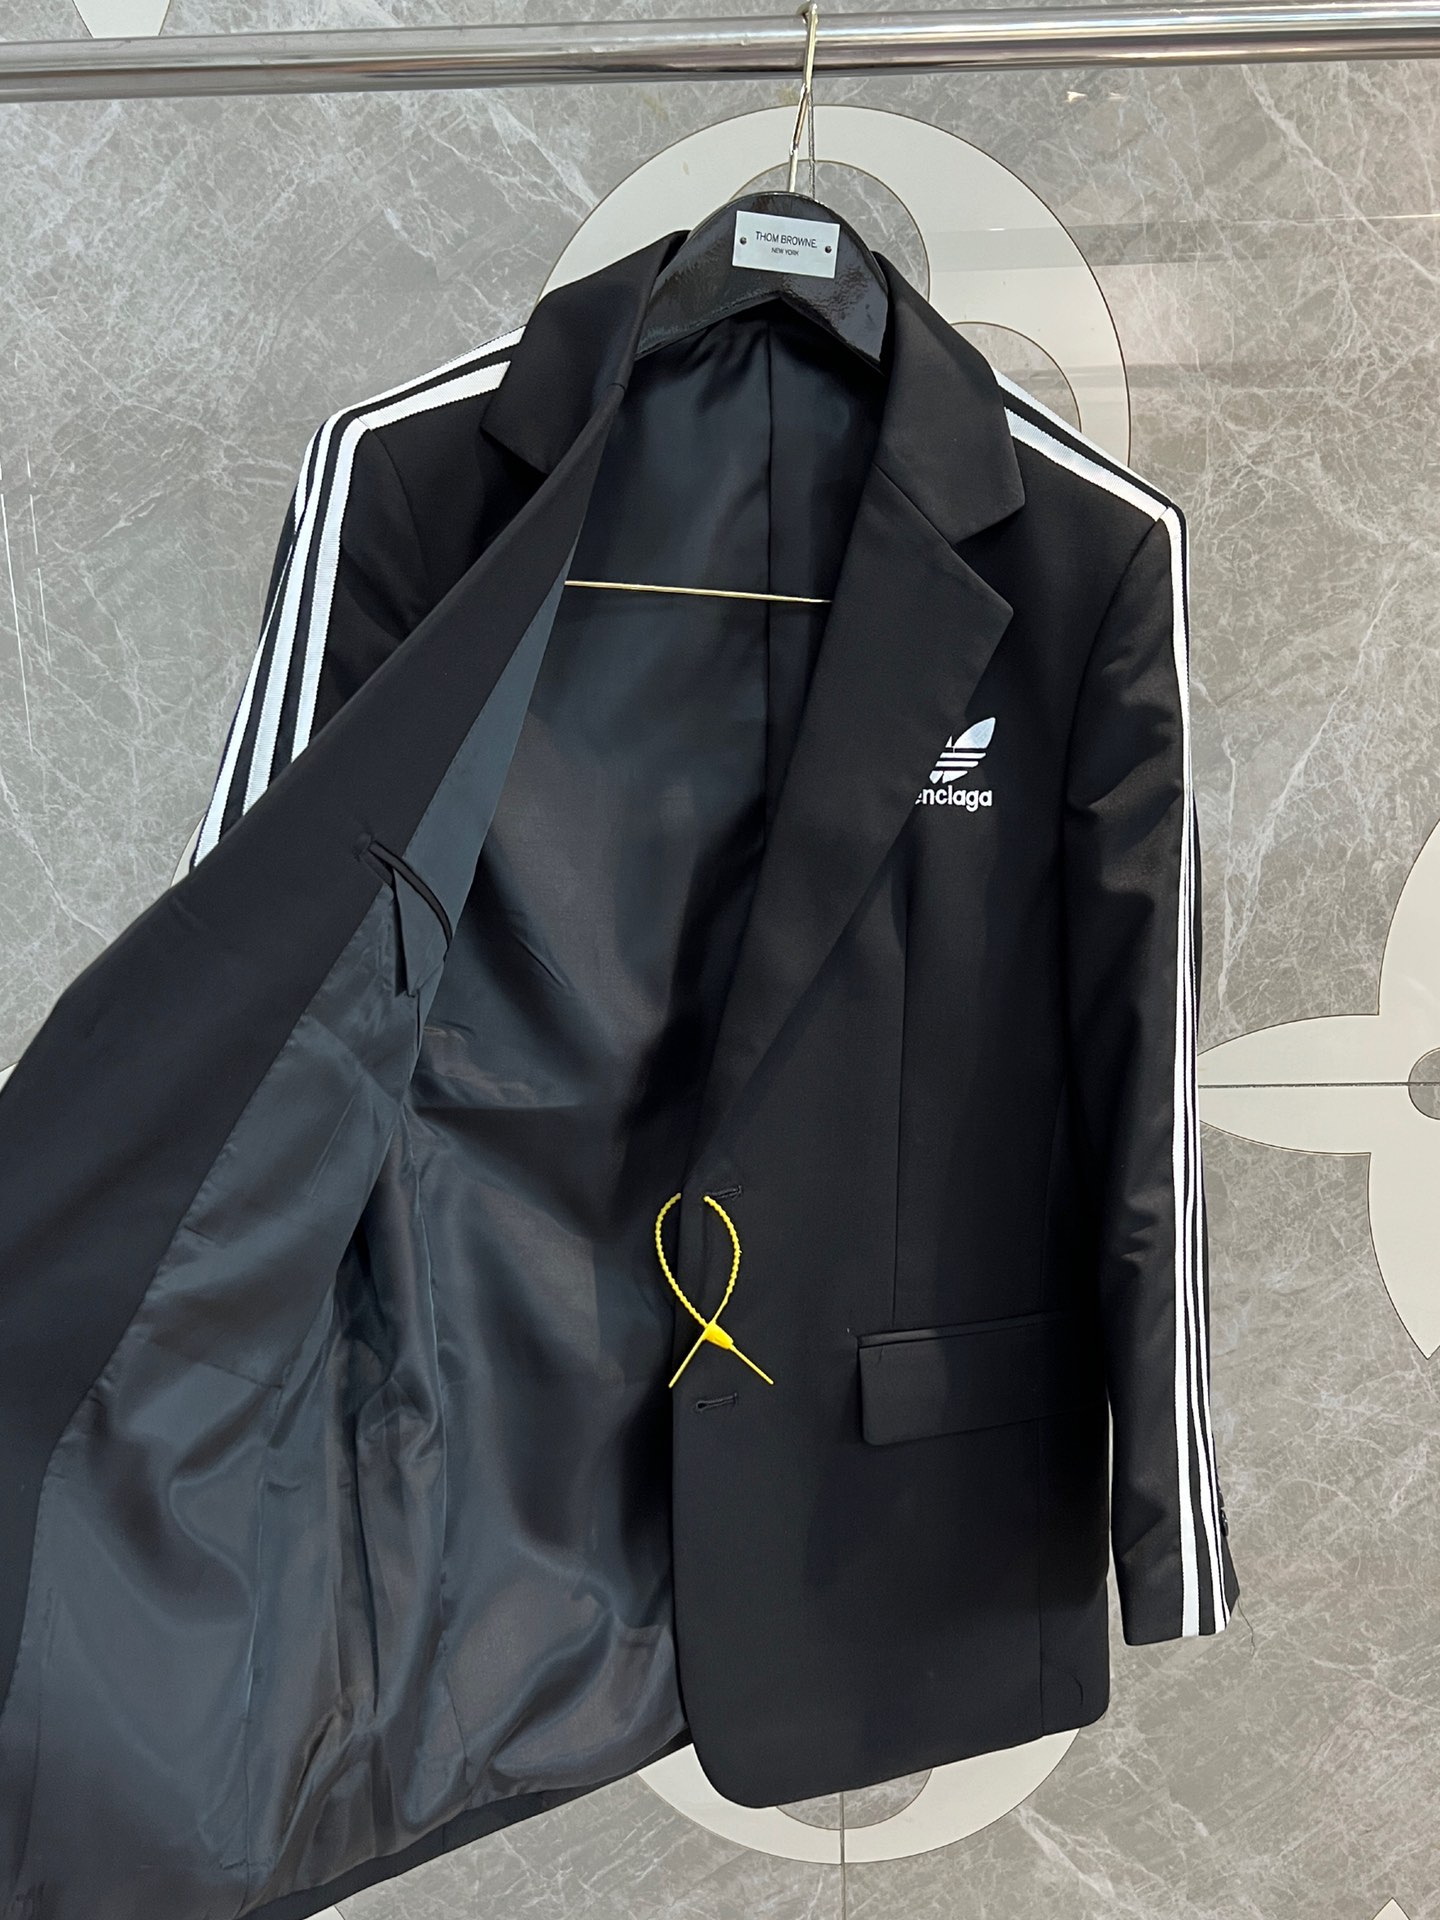 Adidas Business Suit